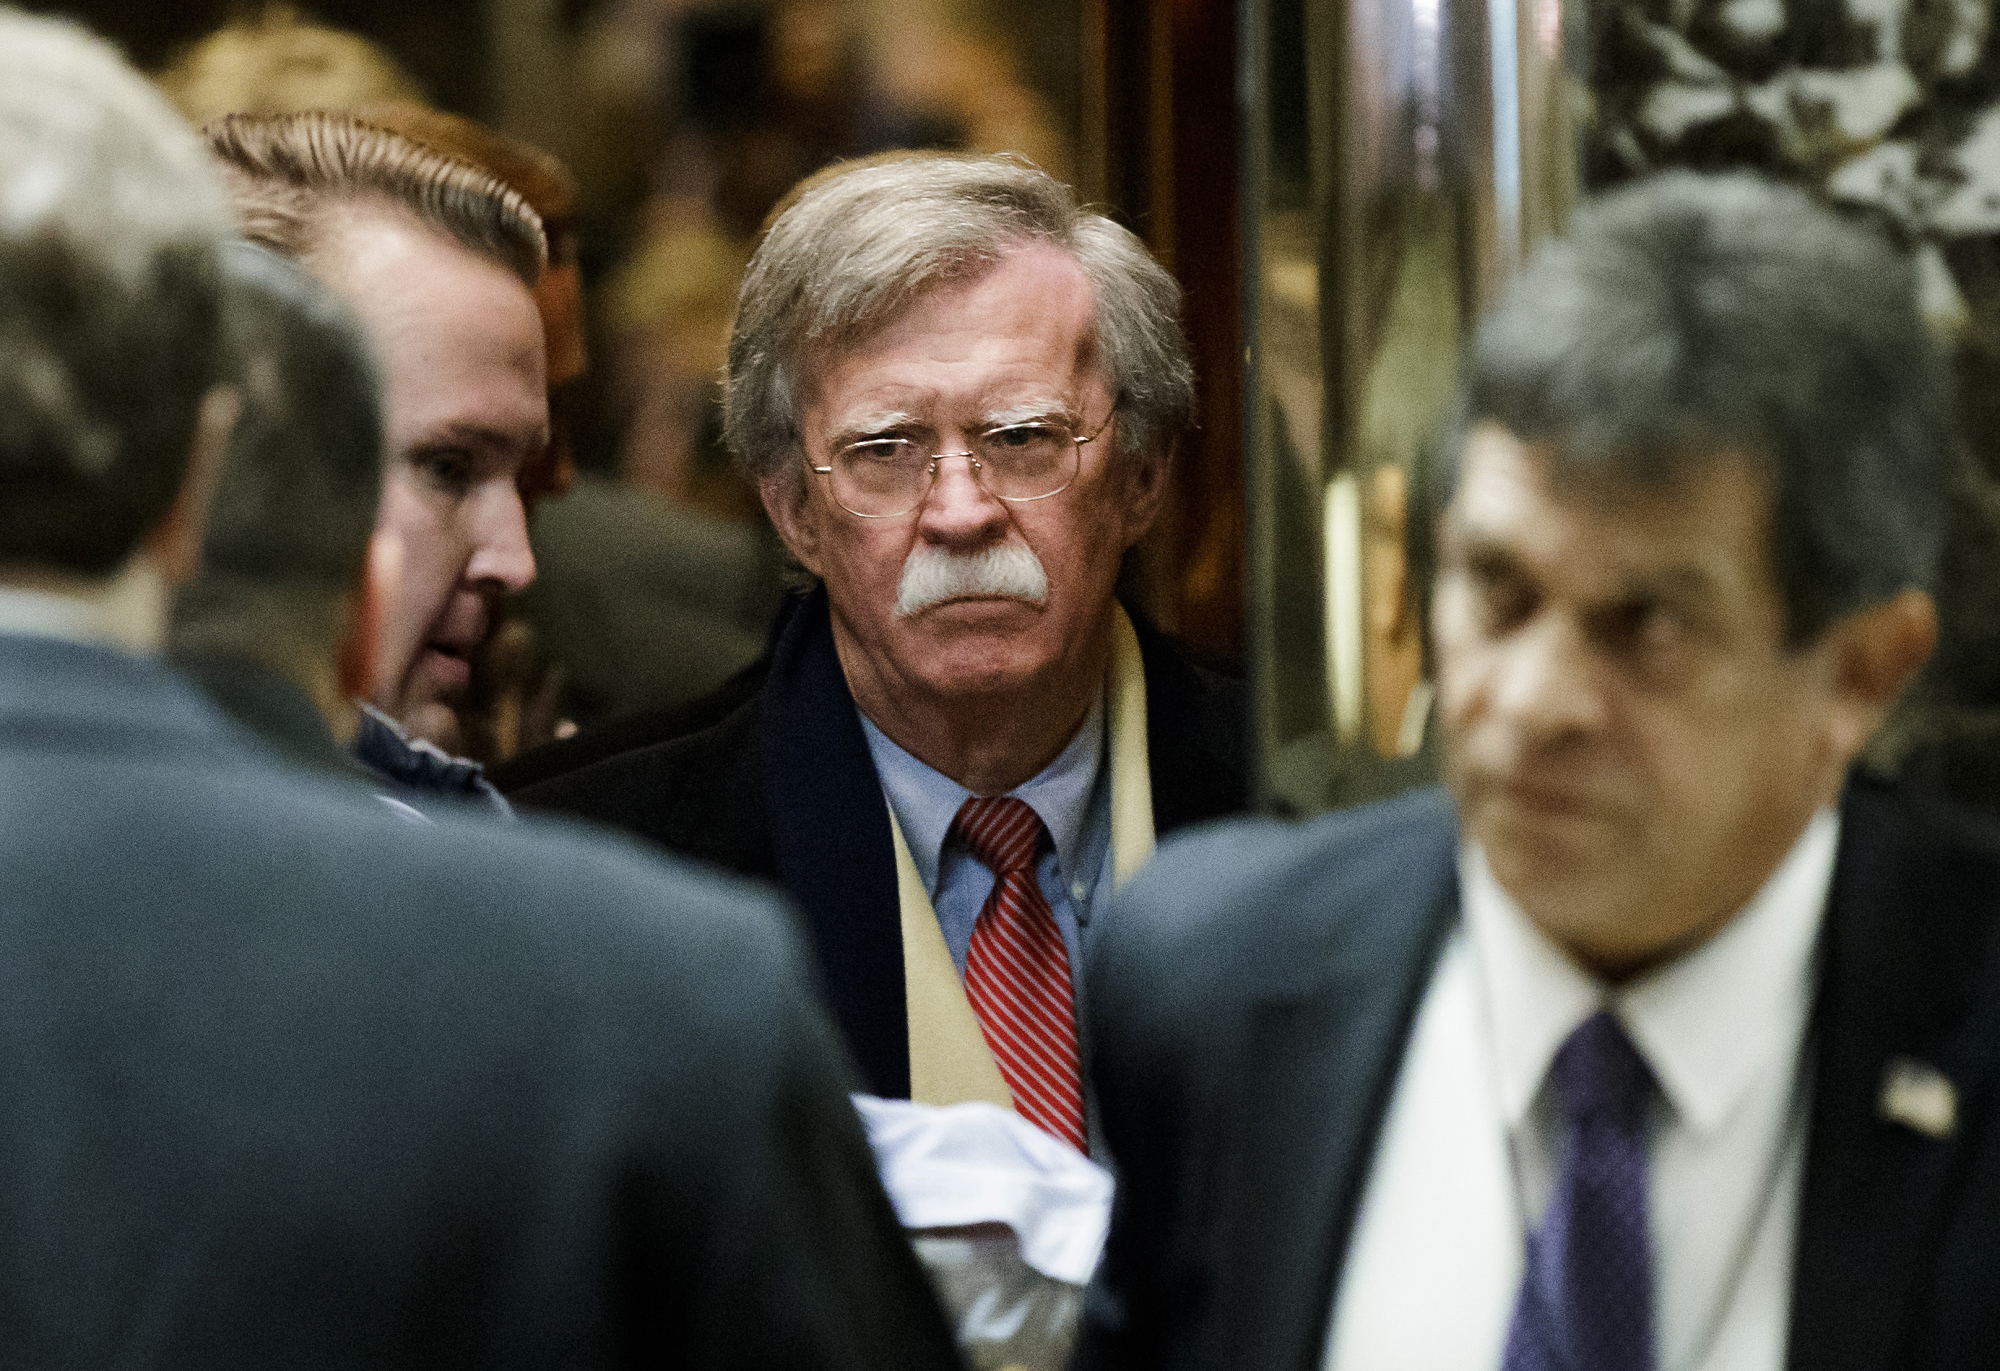 John Bolton, an adviser to President-elect Donald Trump and former ambassador to the United Nations, stands in the elevator of Trump Tower in New York on Dec. 2. | BLOOMBERG